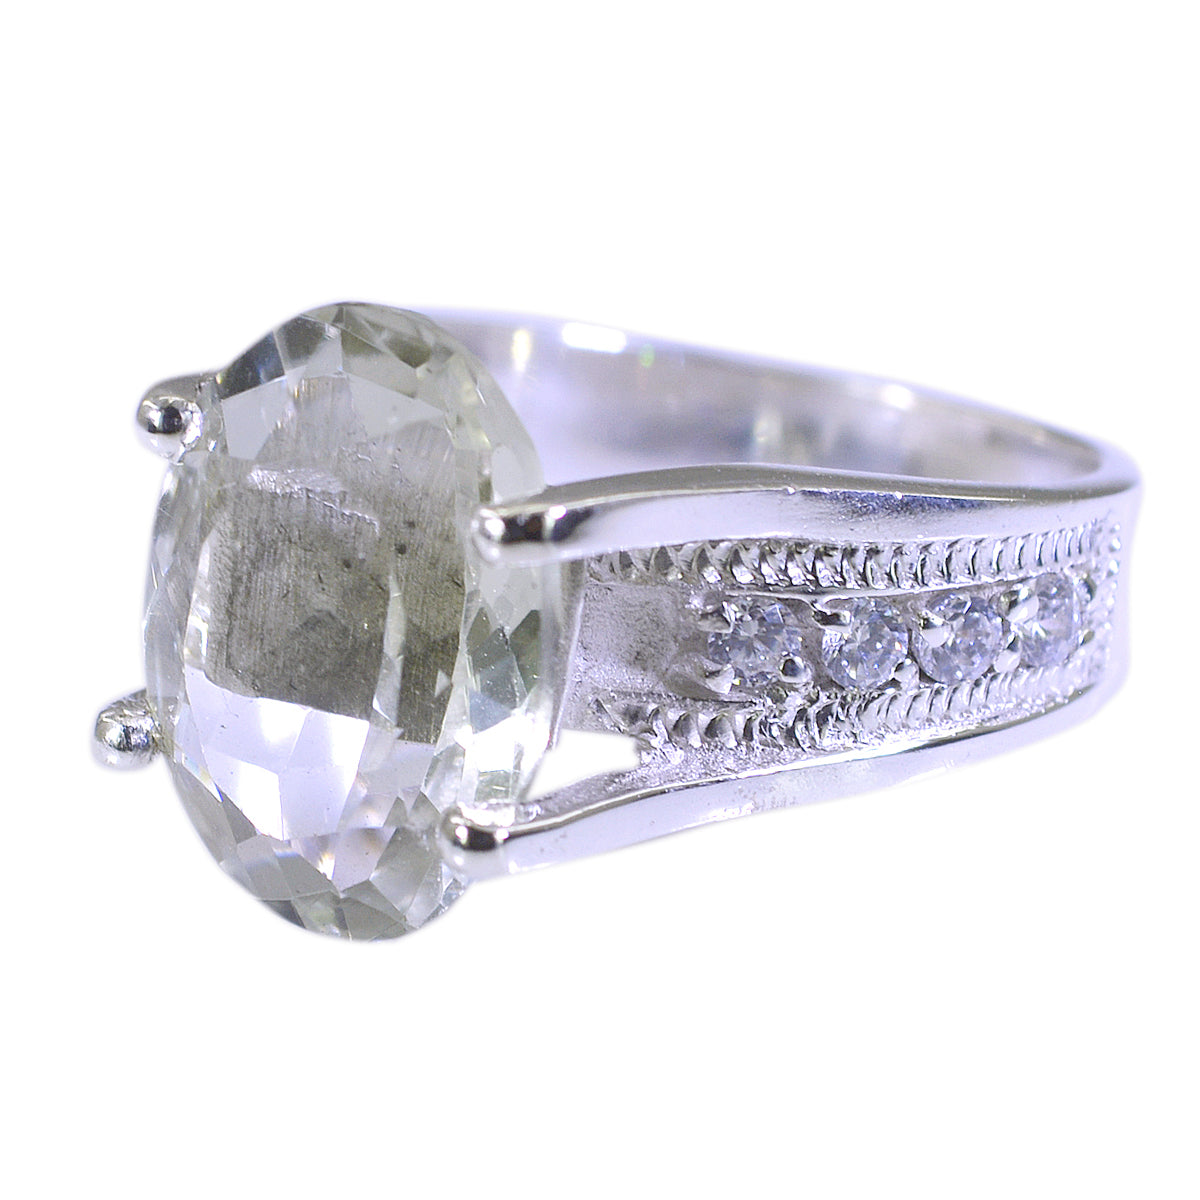 Pleasing Stone Green Amethyst Sterling Silver Ring Infinity Jewelry